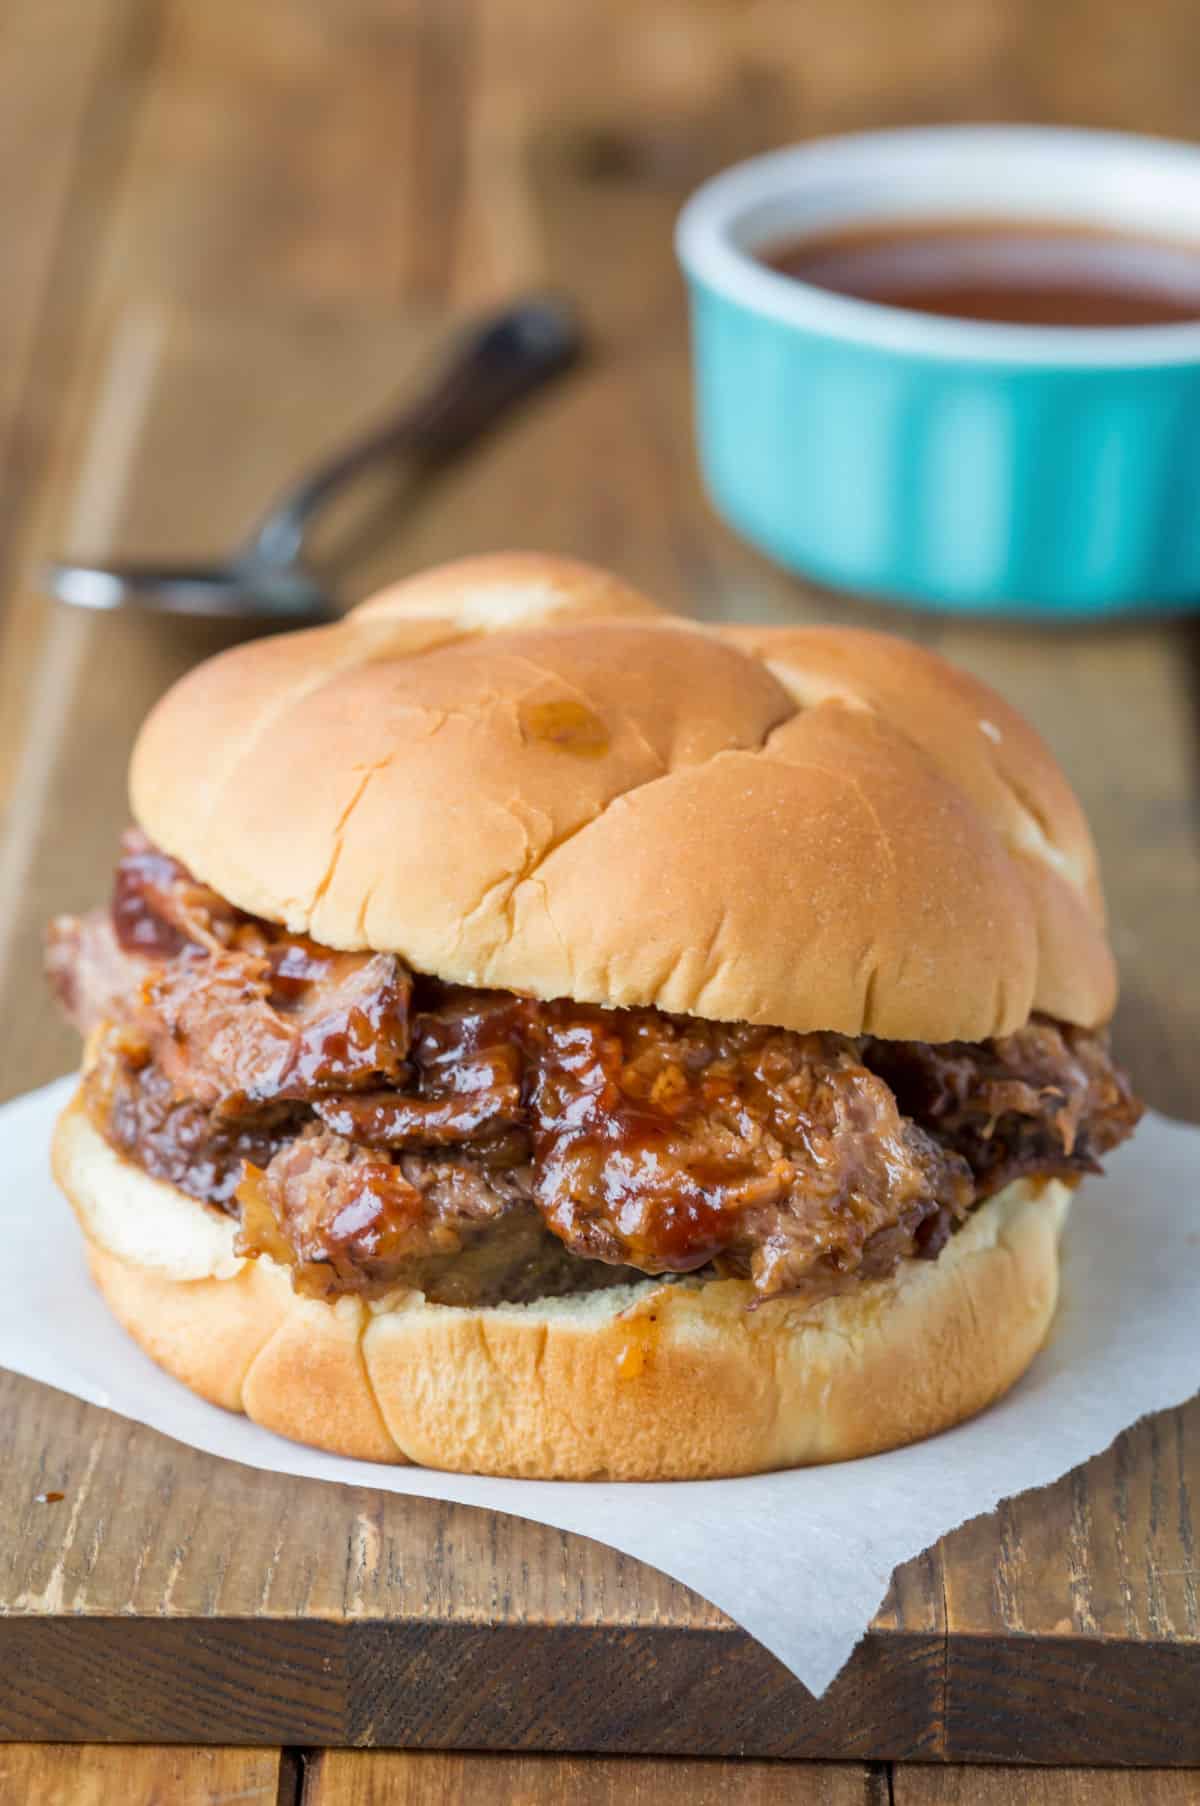 Slow cooker Texas brisket on a bun next to a dish of barbecue sauce.